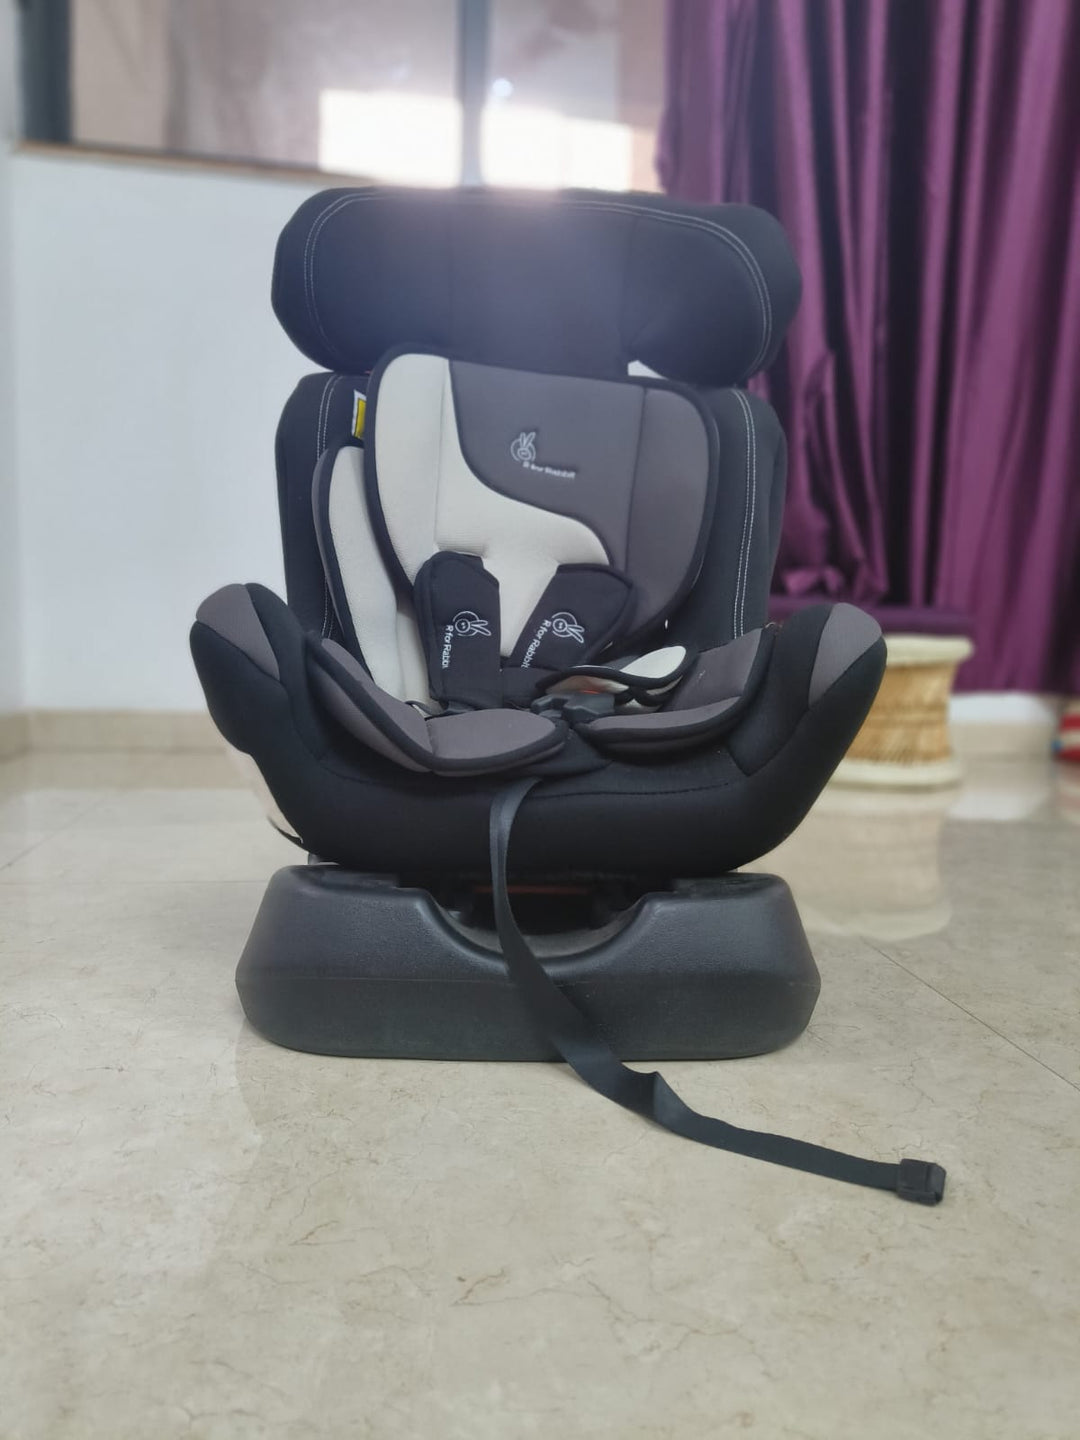 R for Rabbit Convertible car seat